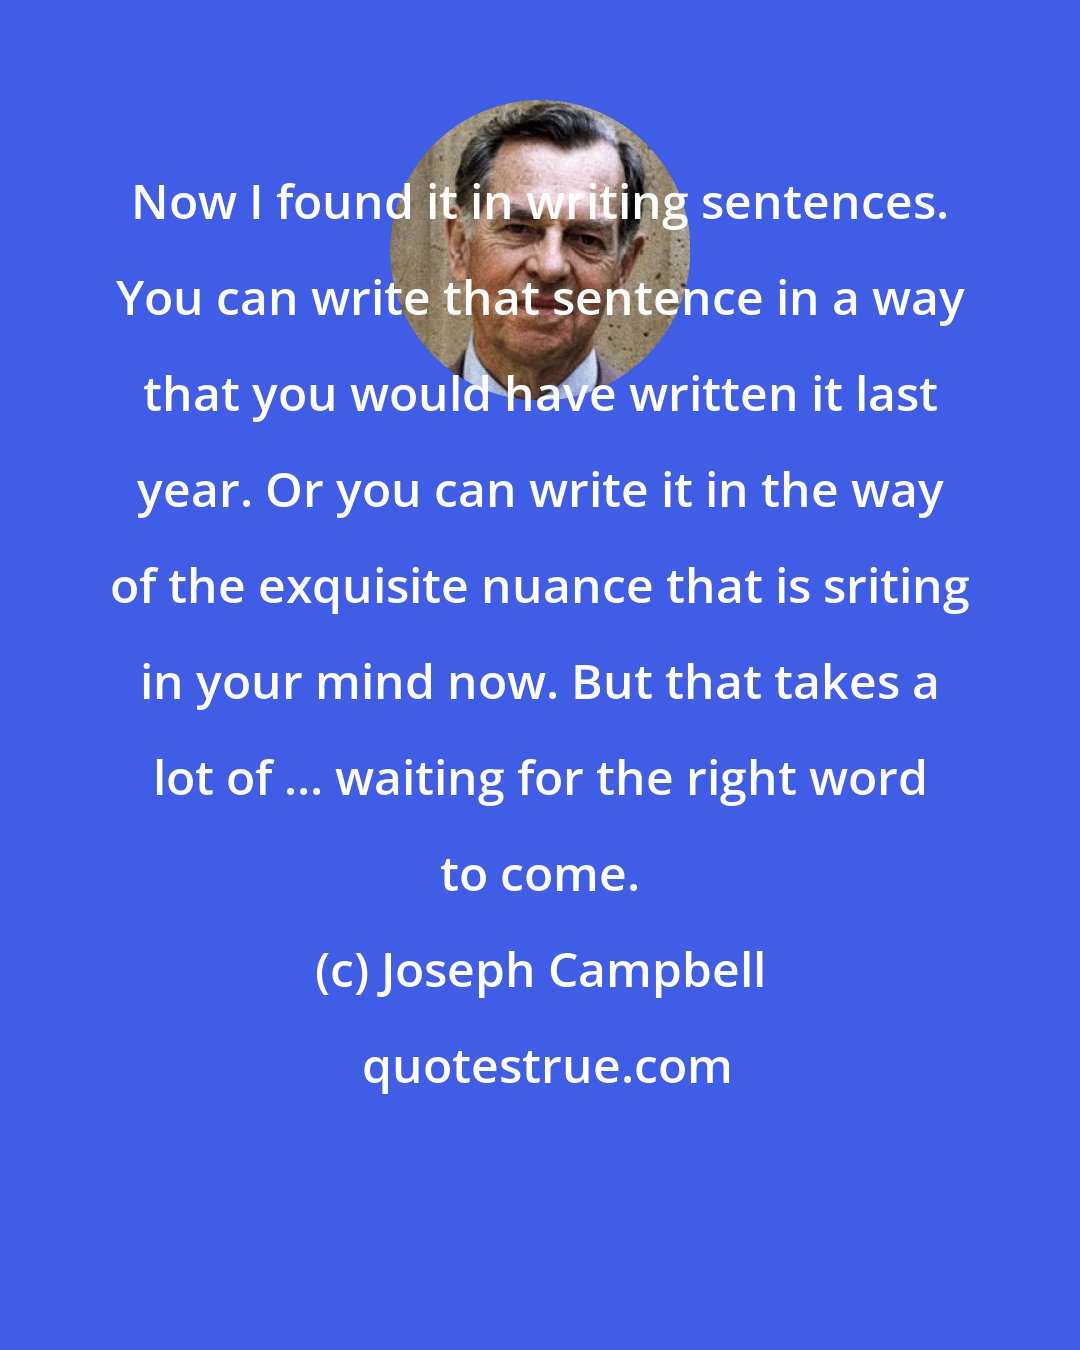 Joseph Campbell: Now I found it in writing sentences. You can write that sentence in a way that you would have written it last year. Or you can write it in the way of the exquisite nuance that is sriting in your mind now. But that takes a lot of ... waiting for the right word to come.